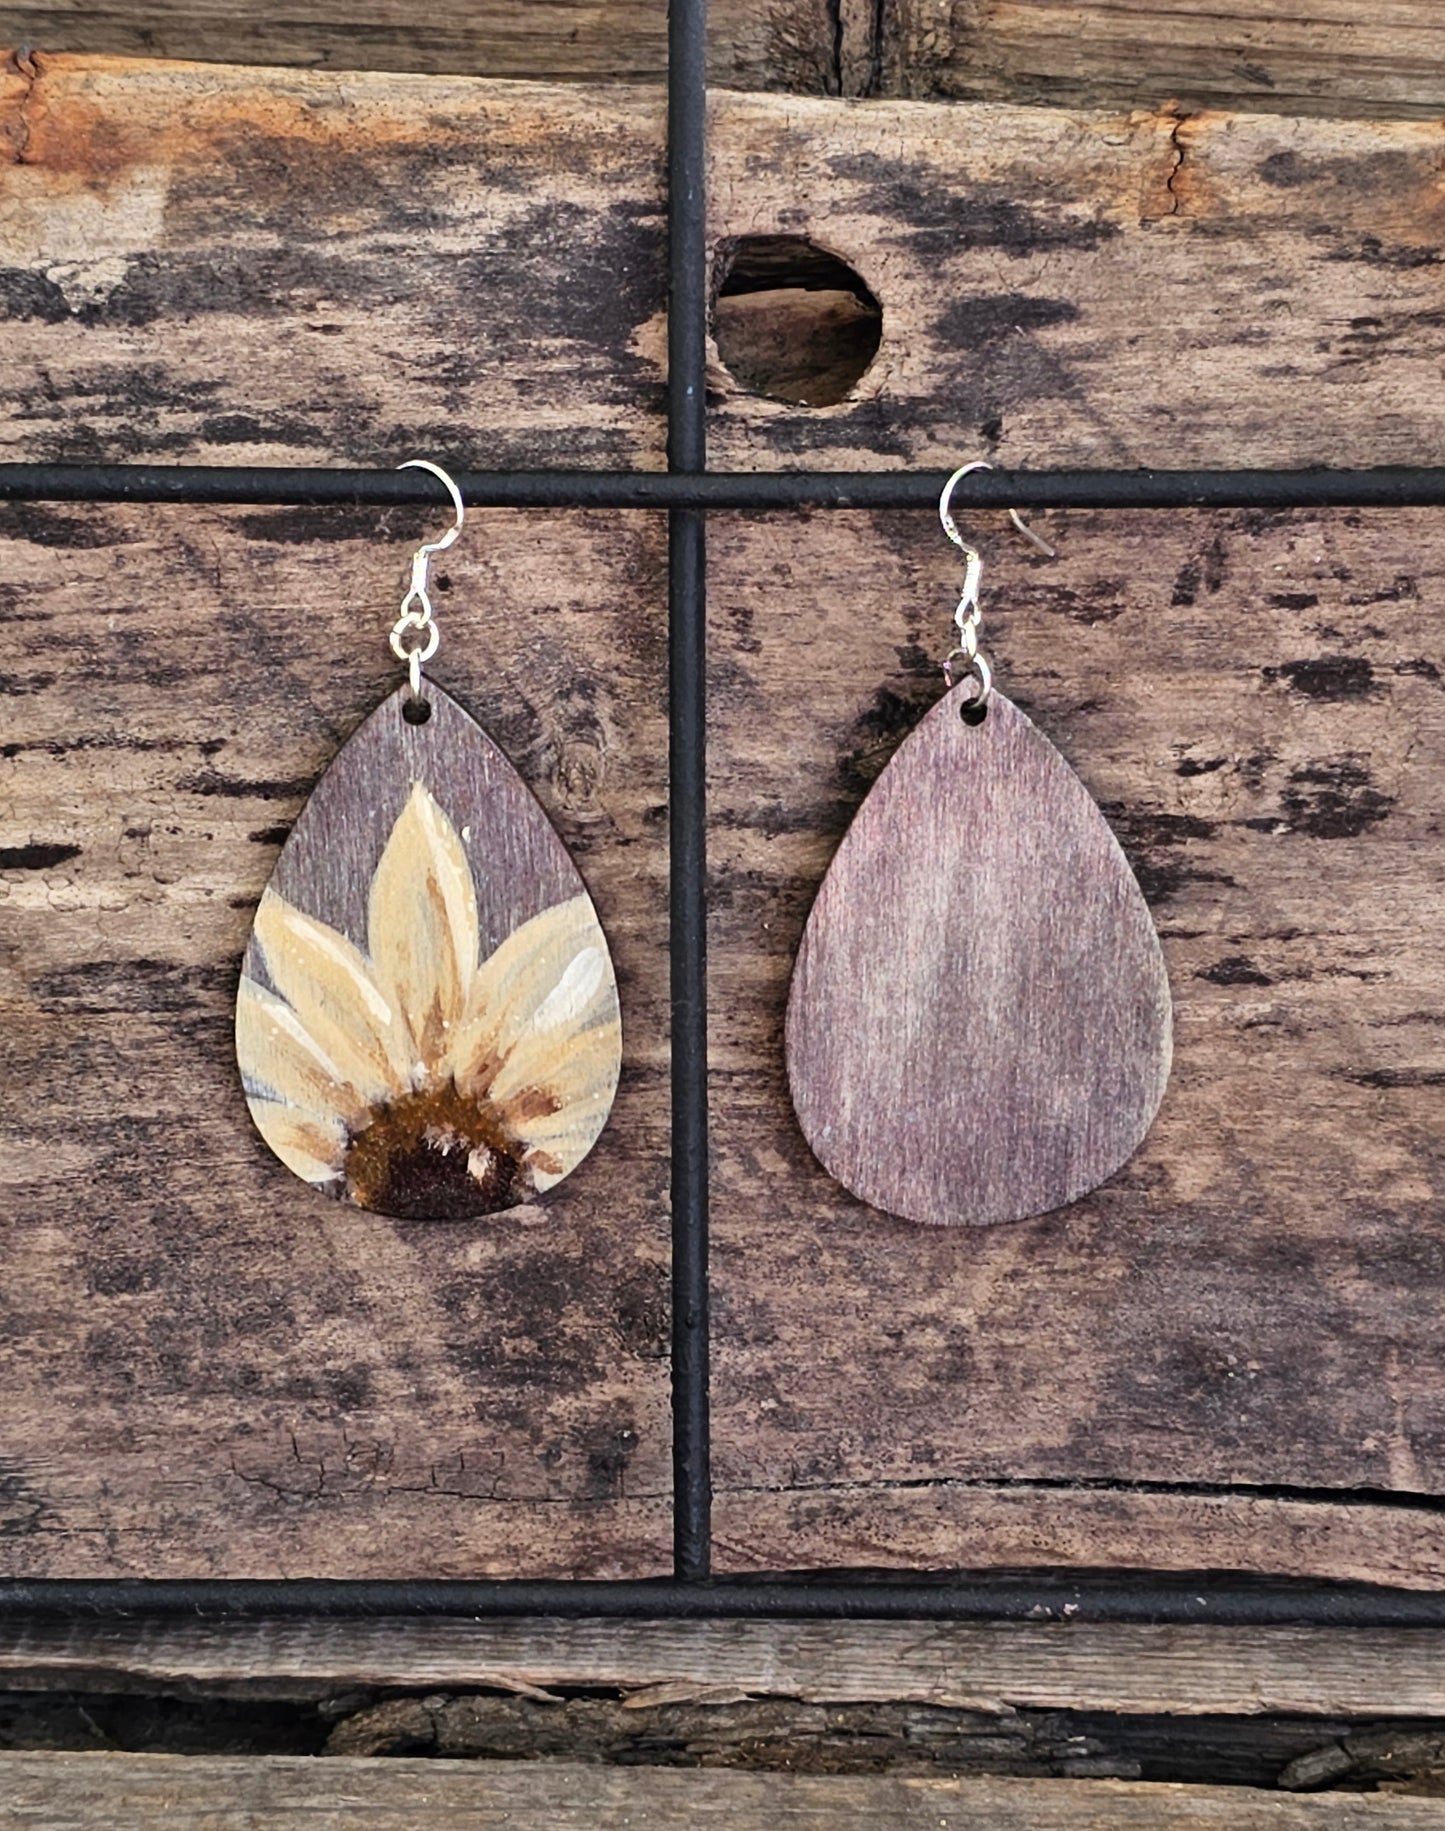 Hand Painted Ultra Lightweight Wooden Earrings. Watercolor and Acrylic. Gray washed painted background with Natural Cream Sunflower. Teardrop in shape. Back is painted in complimentary color. Sterling Silver Findings. Hangs 2 1/4" in Length